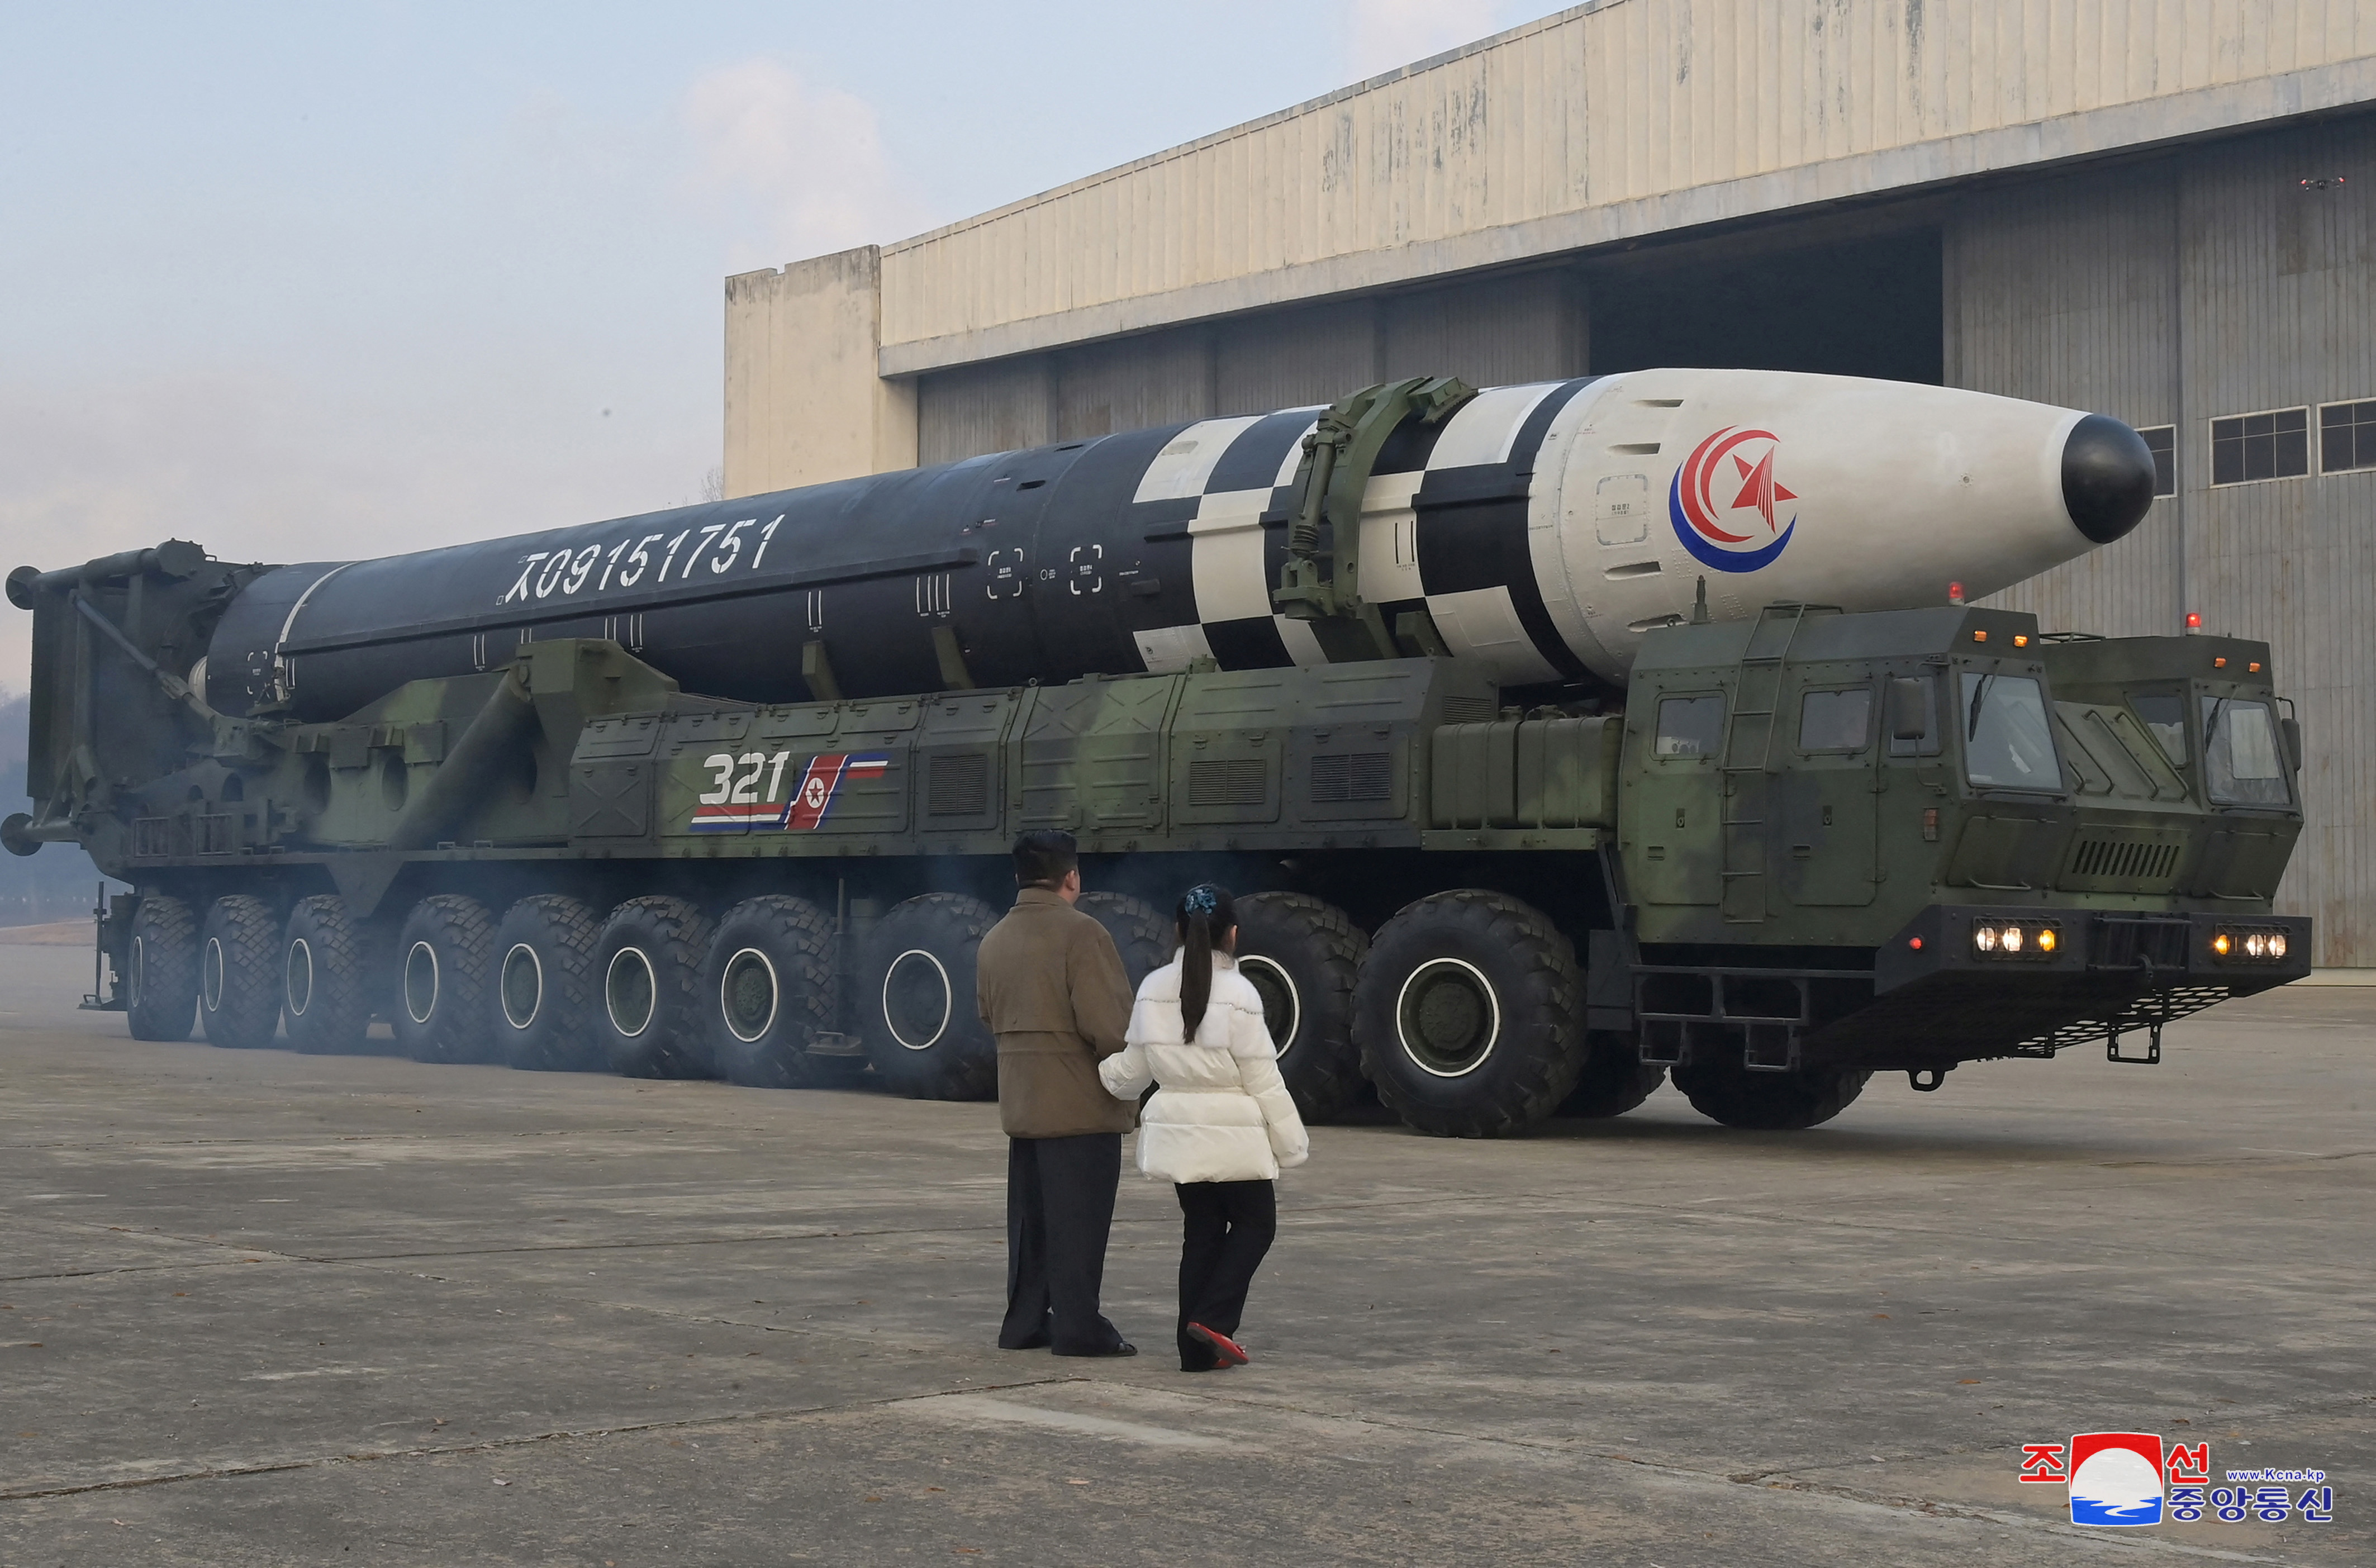 North Korean leader Kim Jong Un, along with his daughter, inspects an intercontinental ballistic missile in this undated photo released on November 19, 2022.